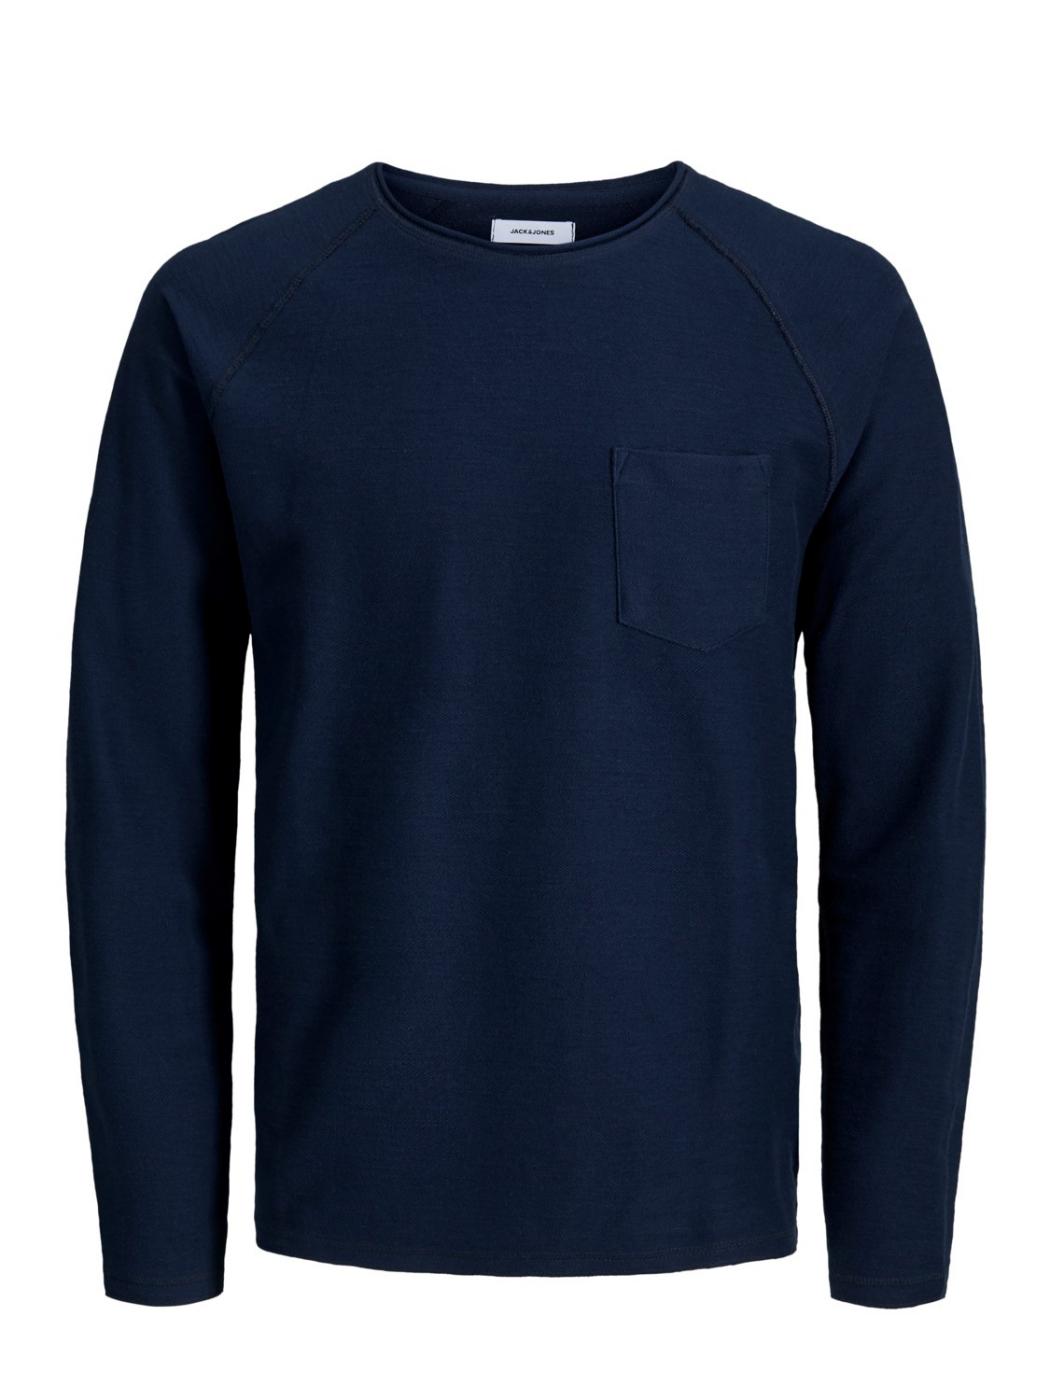 JEETERRY SWEAT O-NECK NOOS NS TOPS NAVY-W